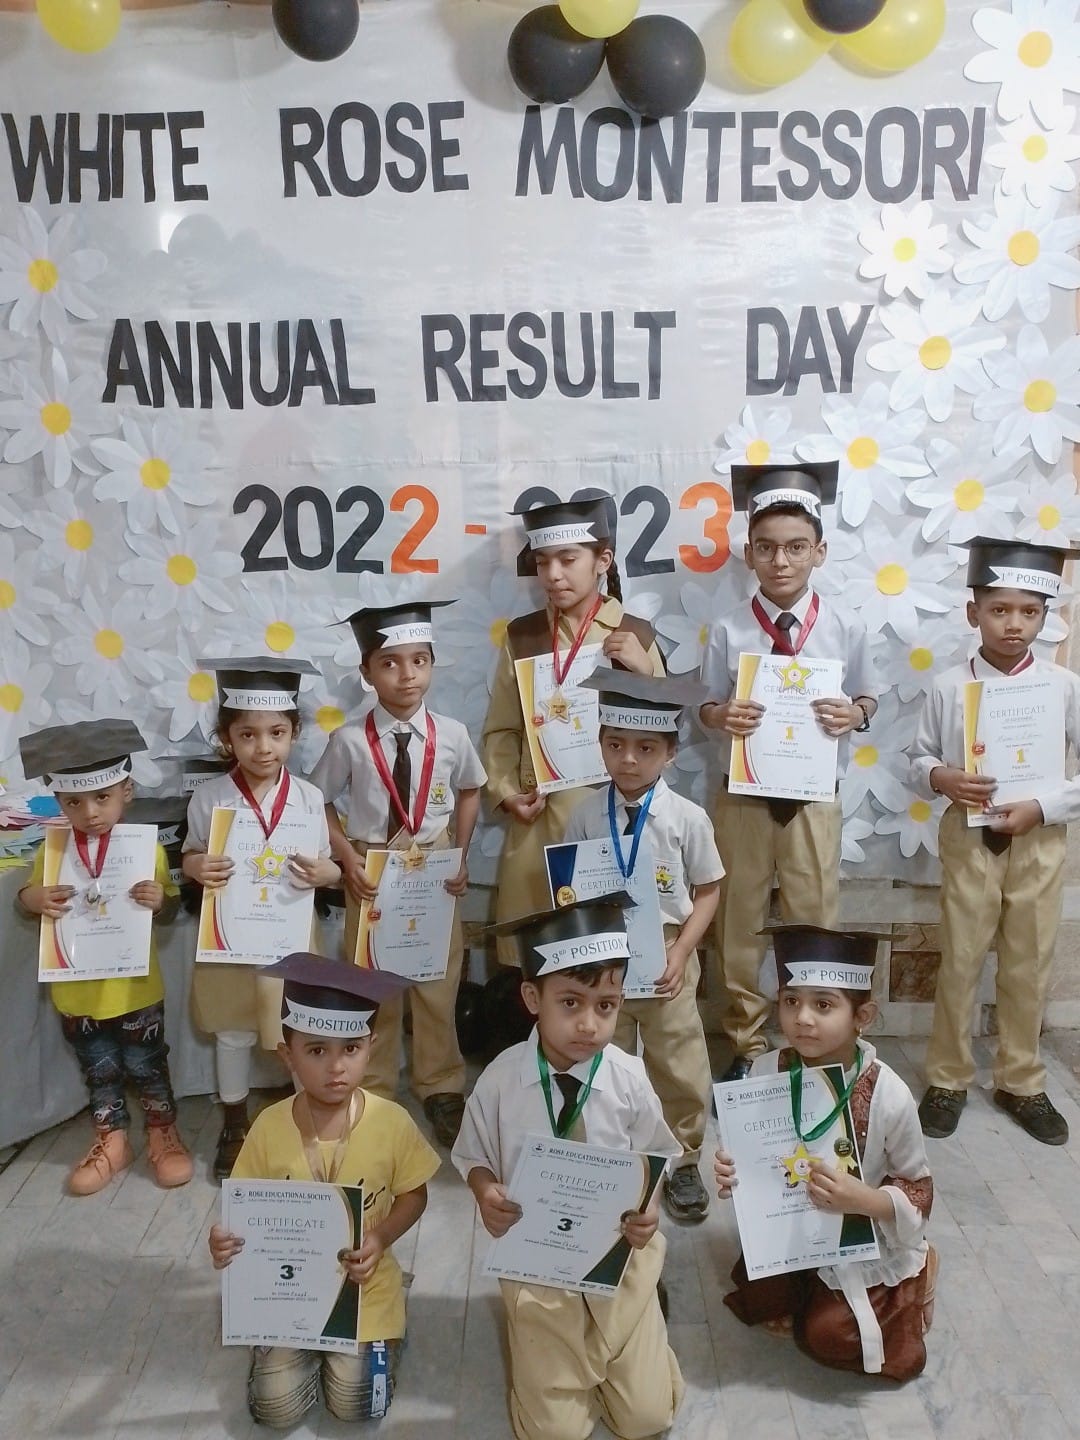 Annual Result day Of WHITE ZONE